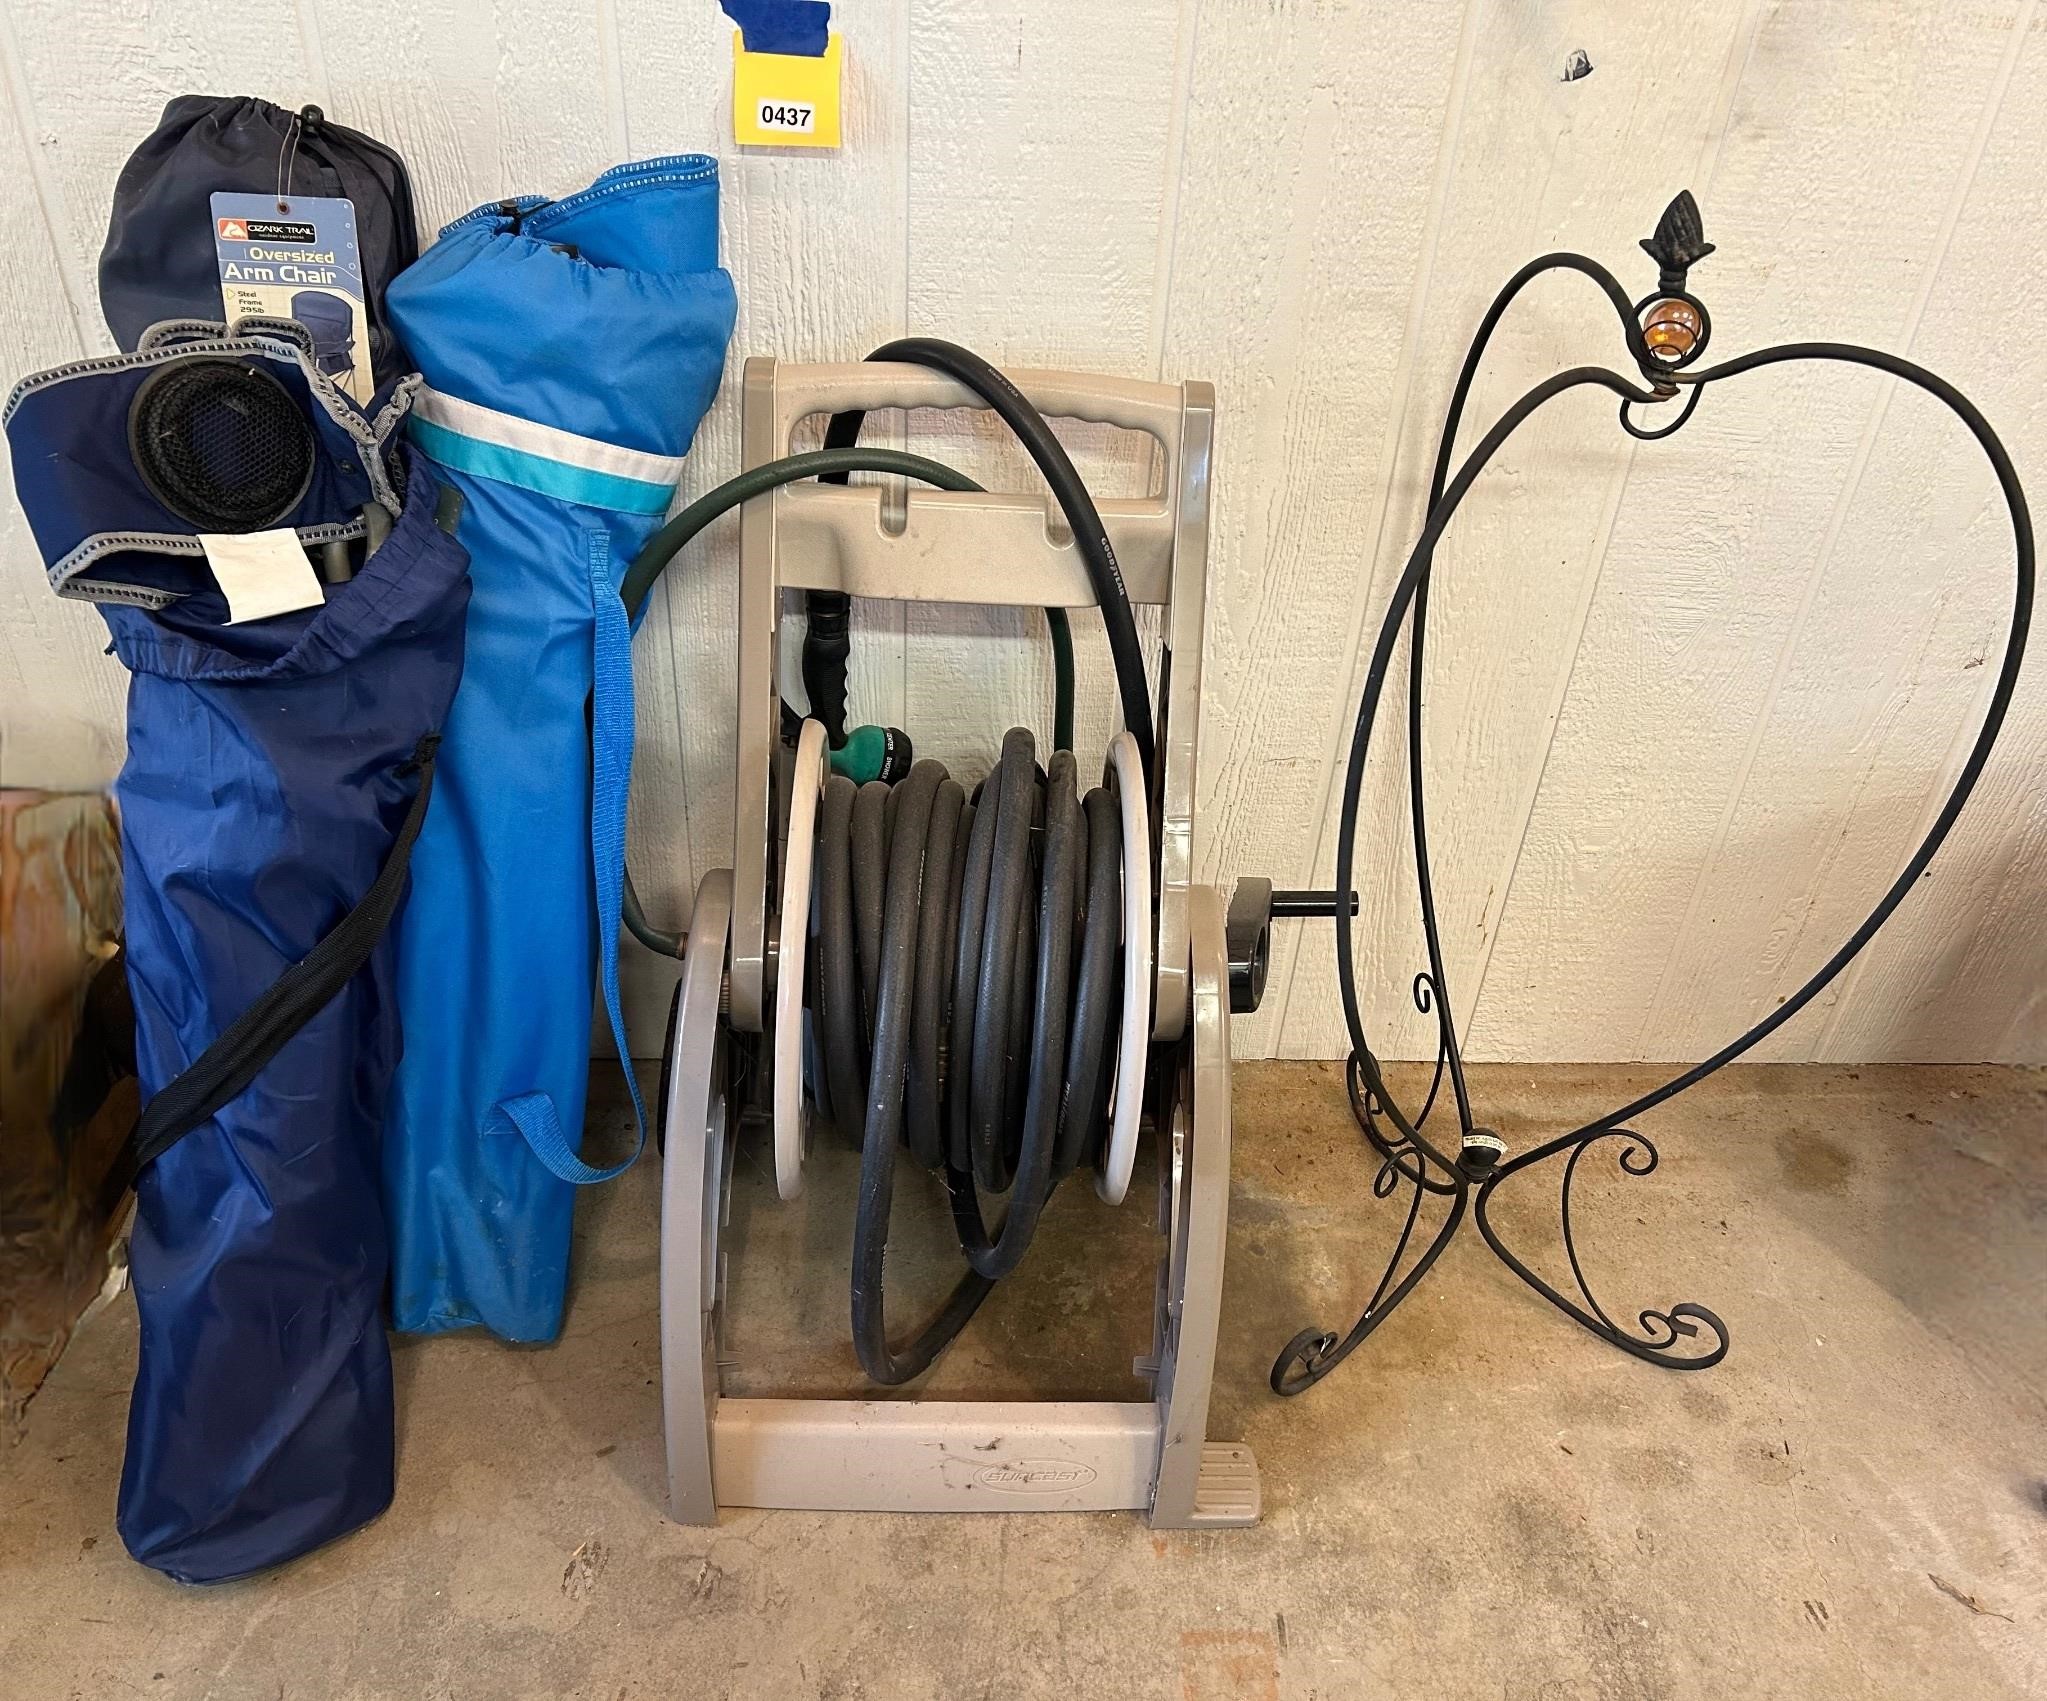 Hose, Reel & Chairs